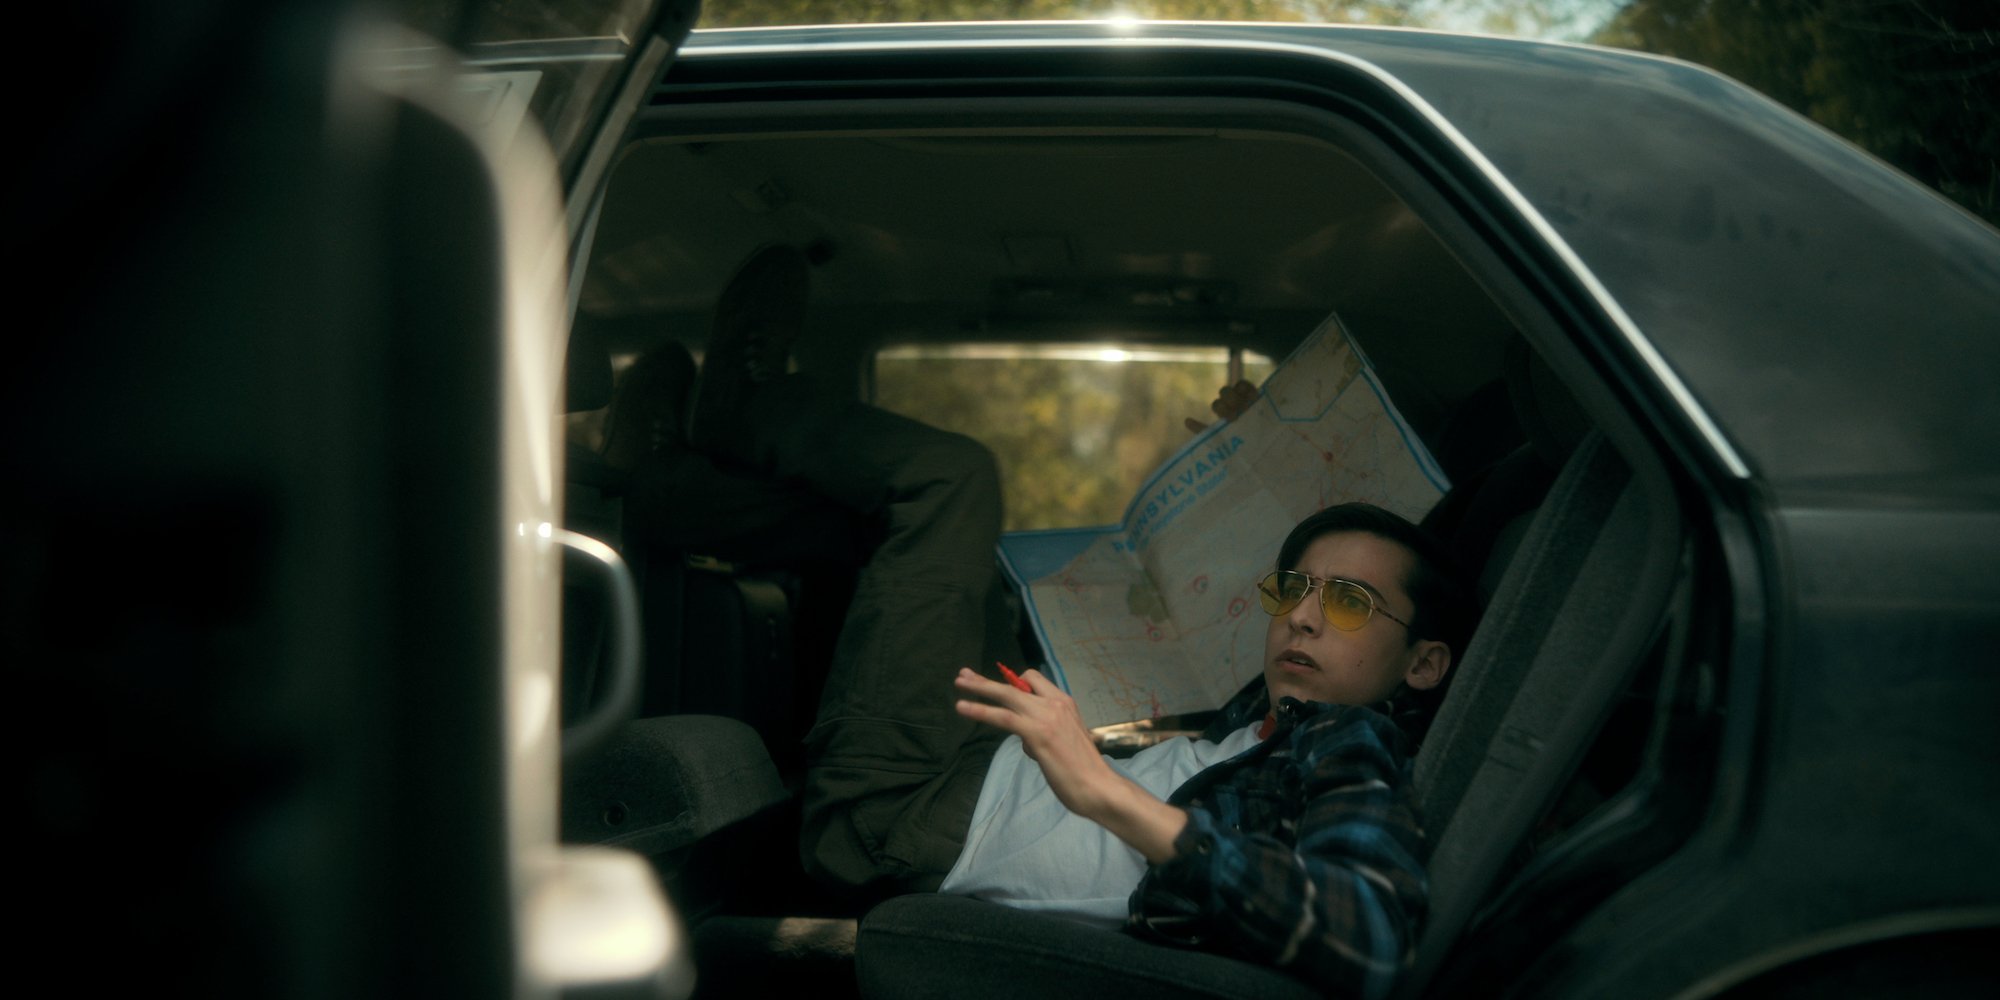 Aiden Gallagher as Number Five sitting in the back of a car in a production still. 'The Umbrella Academy' Season 3 full-length trailer arrives on May 19.